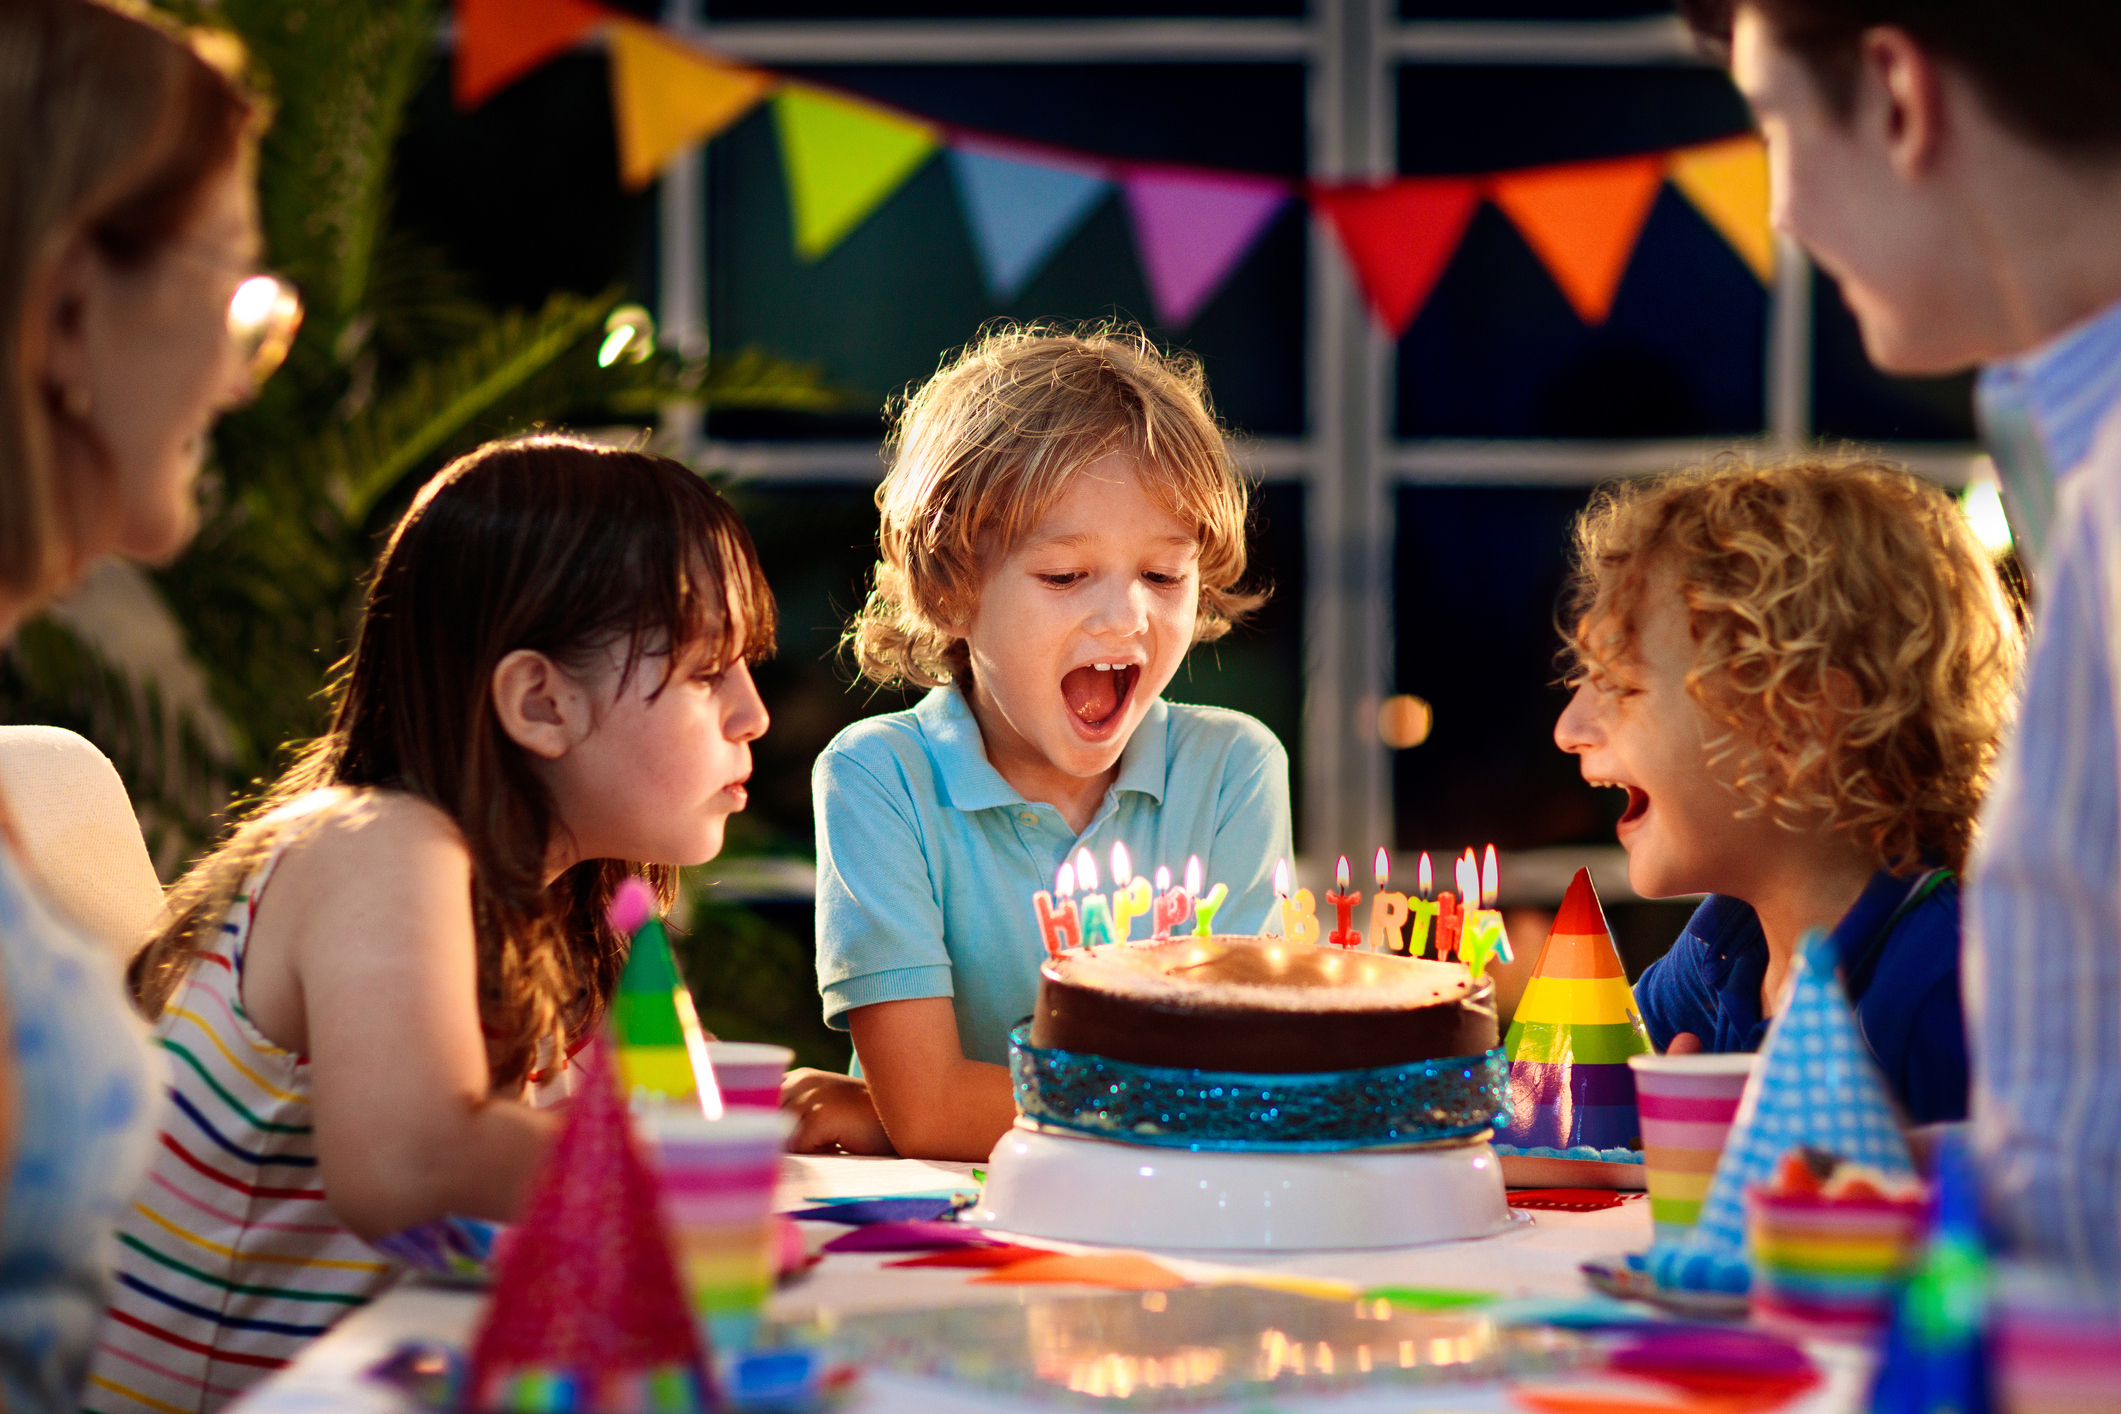 Food Allergies and Birthday Parties